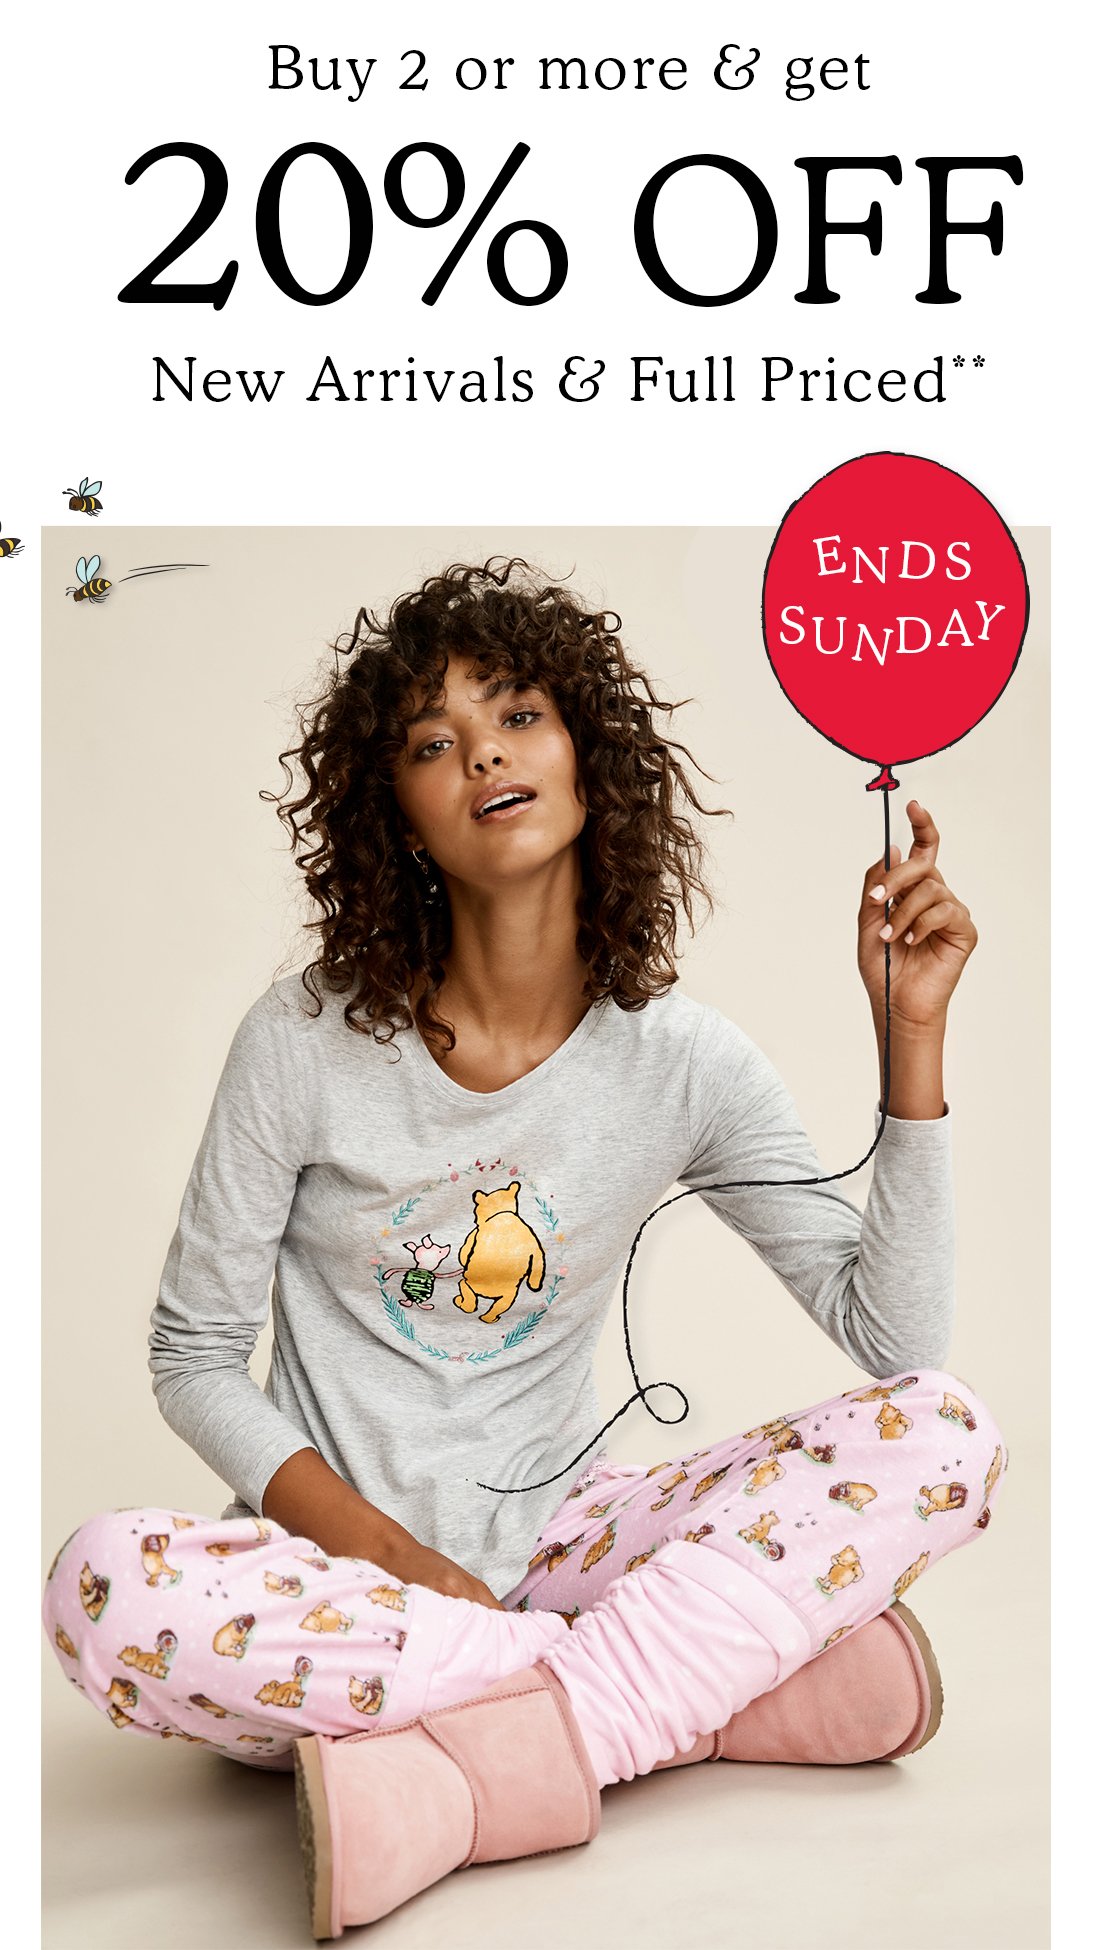 Peter Alexander: Pooh Bear from top to bottom with 20% Off 2 or more